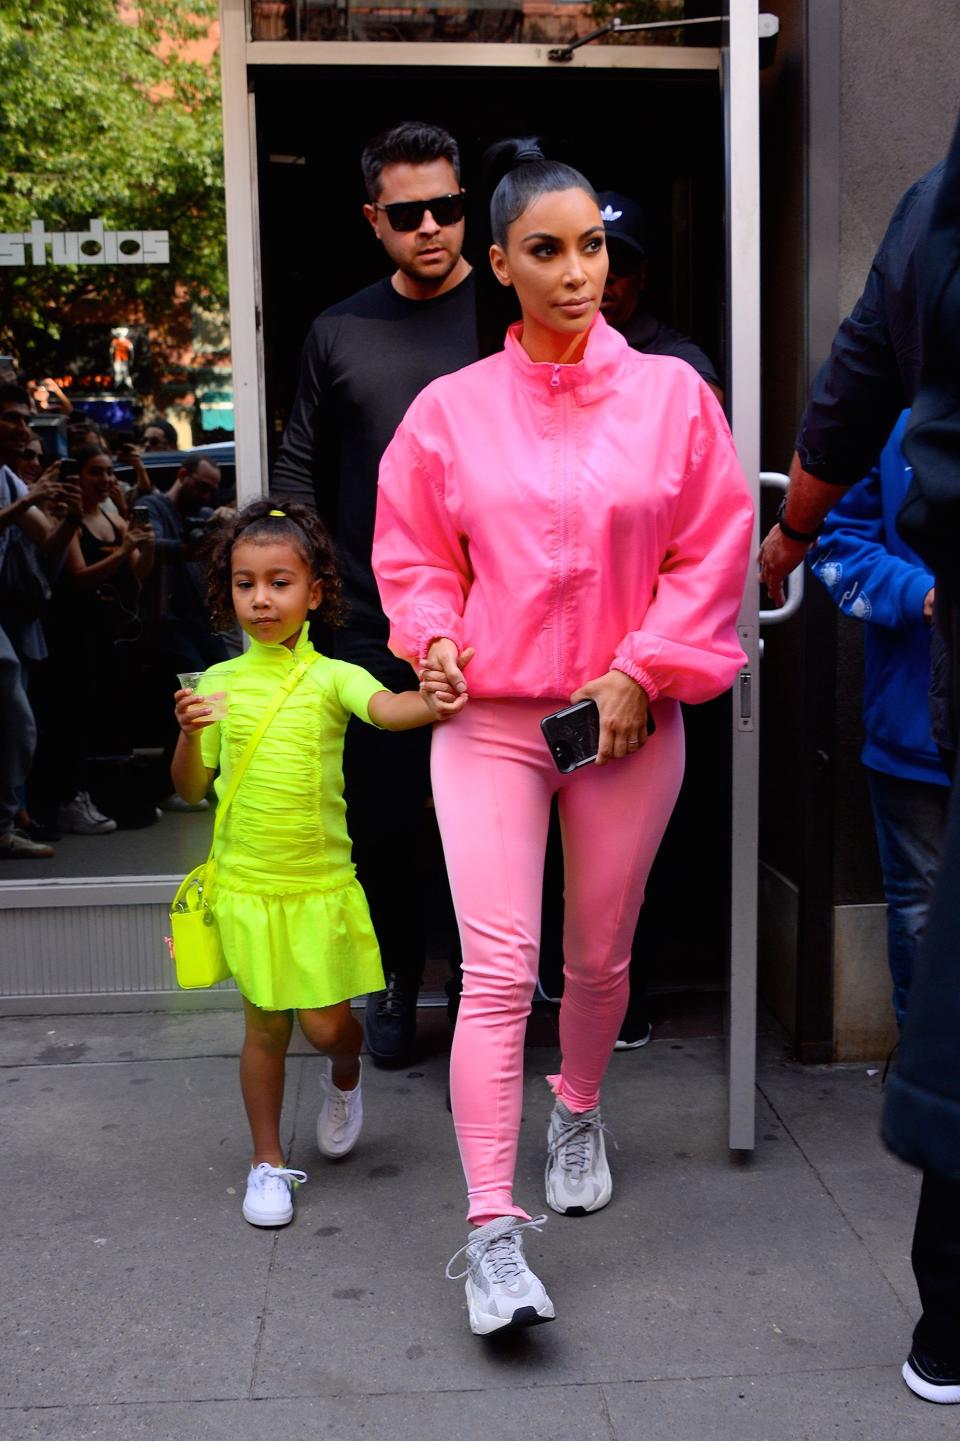 Kim Kardashian and North West in the street in NYC